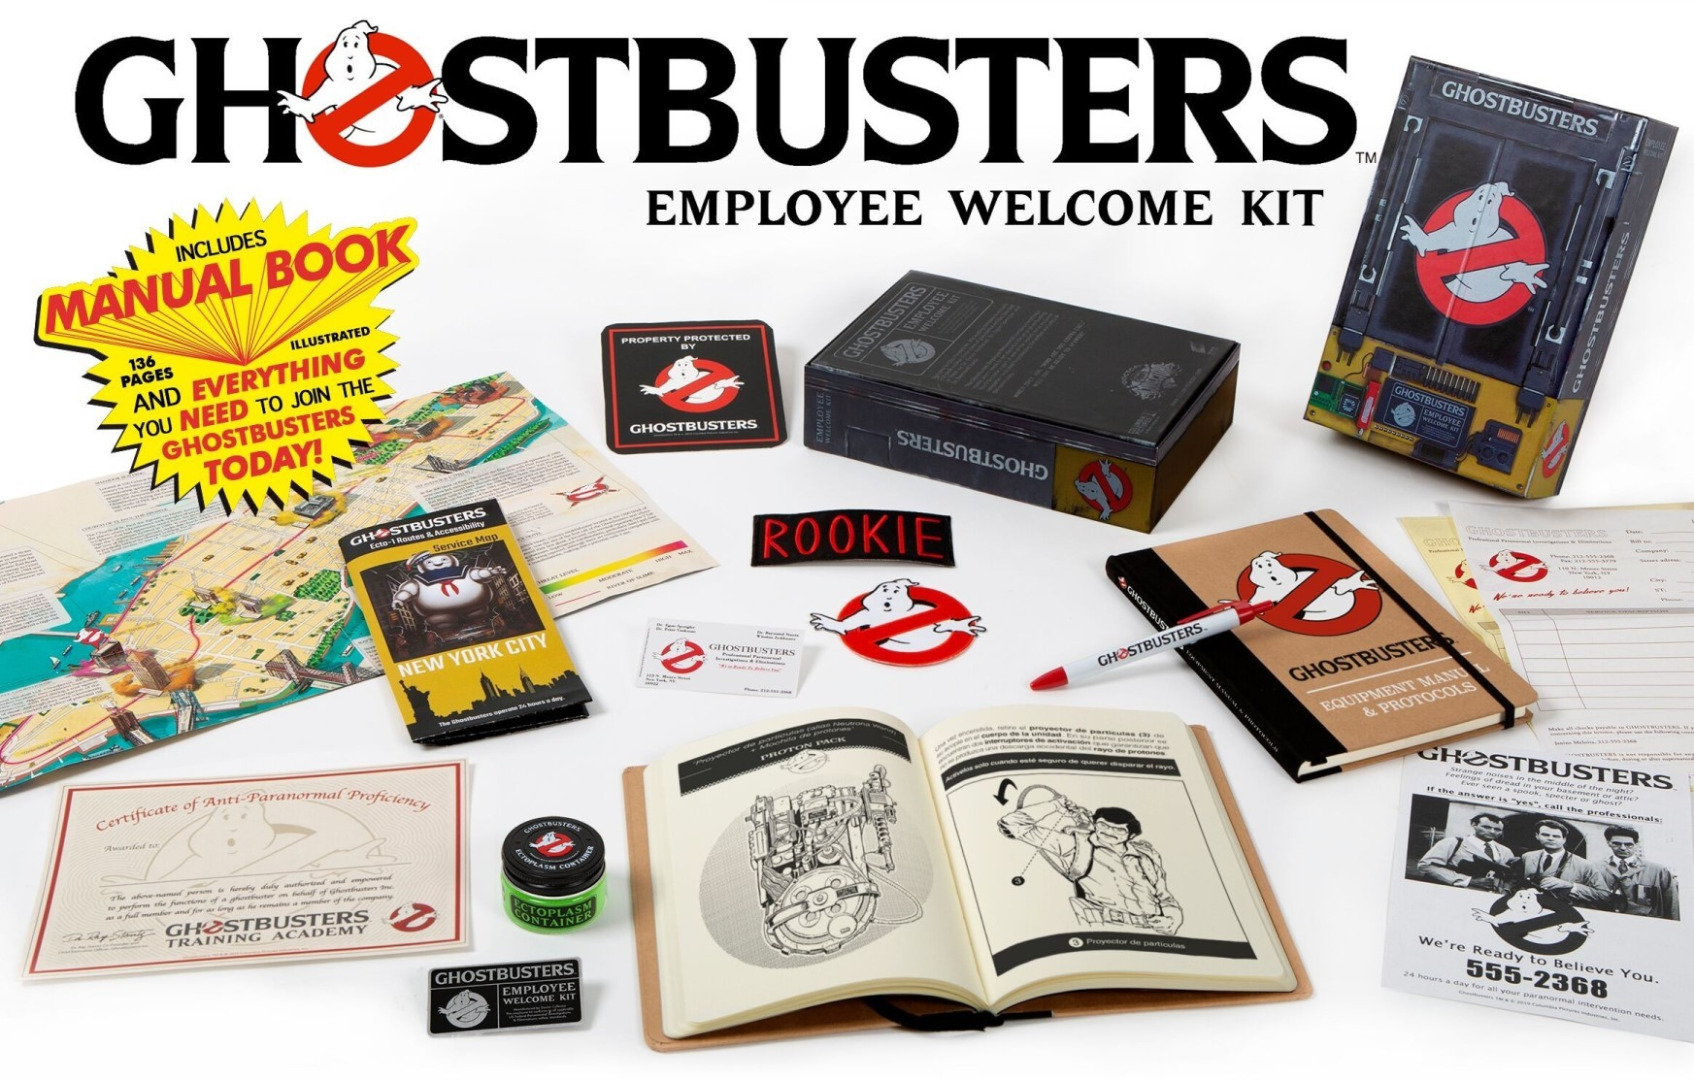 Ghostbusters: Employee Welcome Kit 